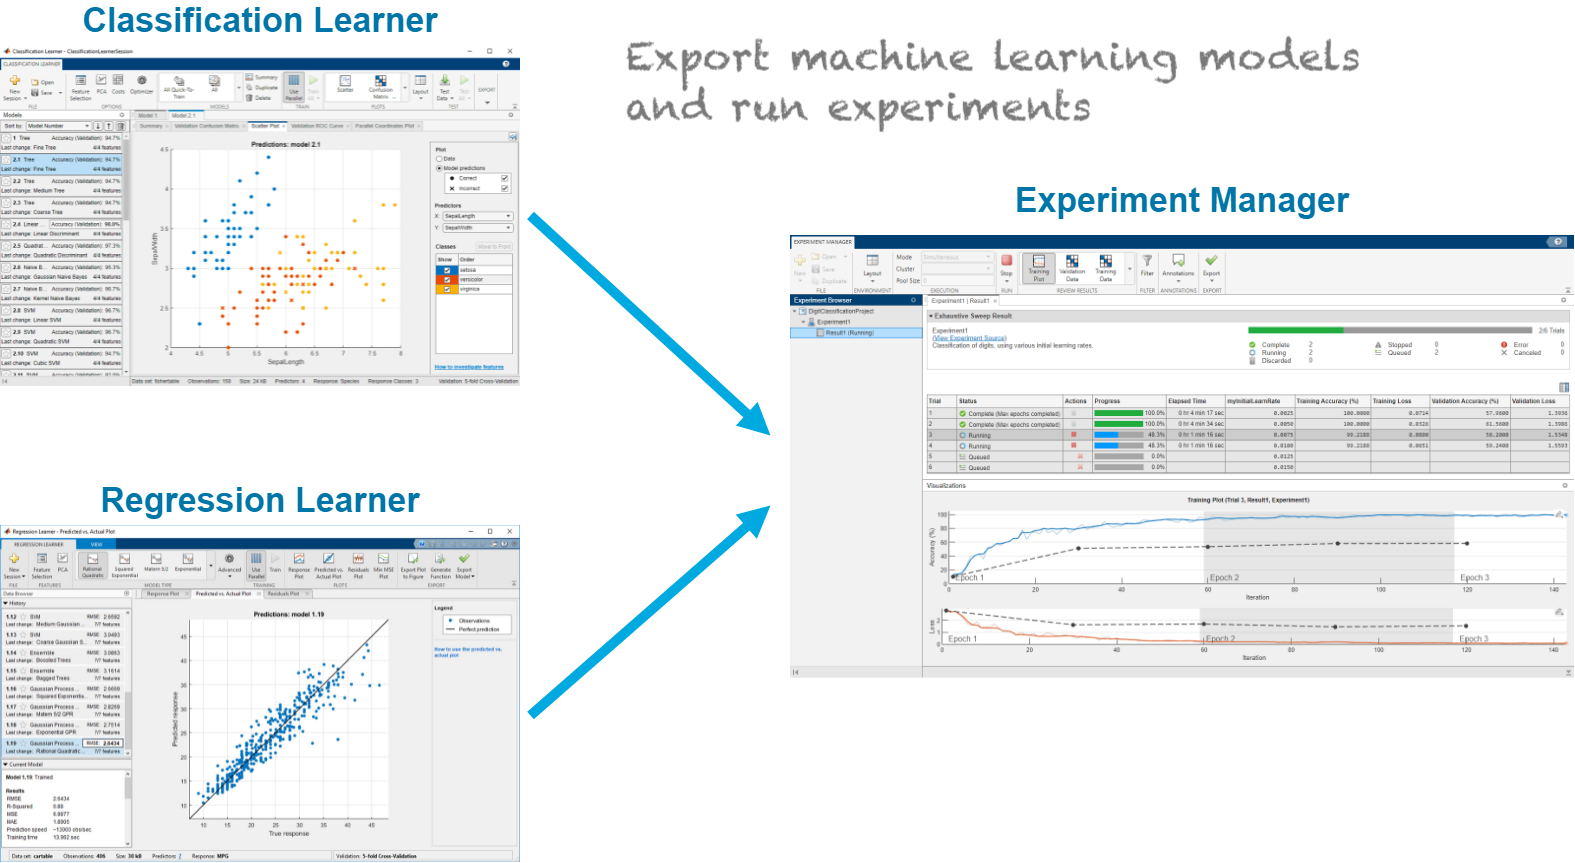 Export machine learning models from the Classification Learner and Regression Learner apps to the Experiment Manager app, and run experiments on the exported machine learning models